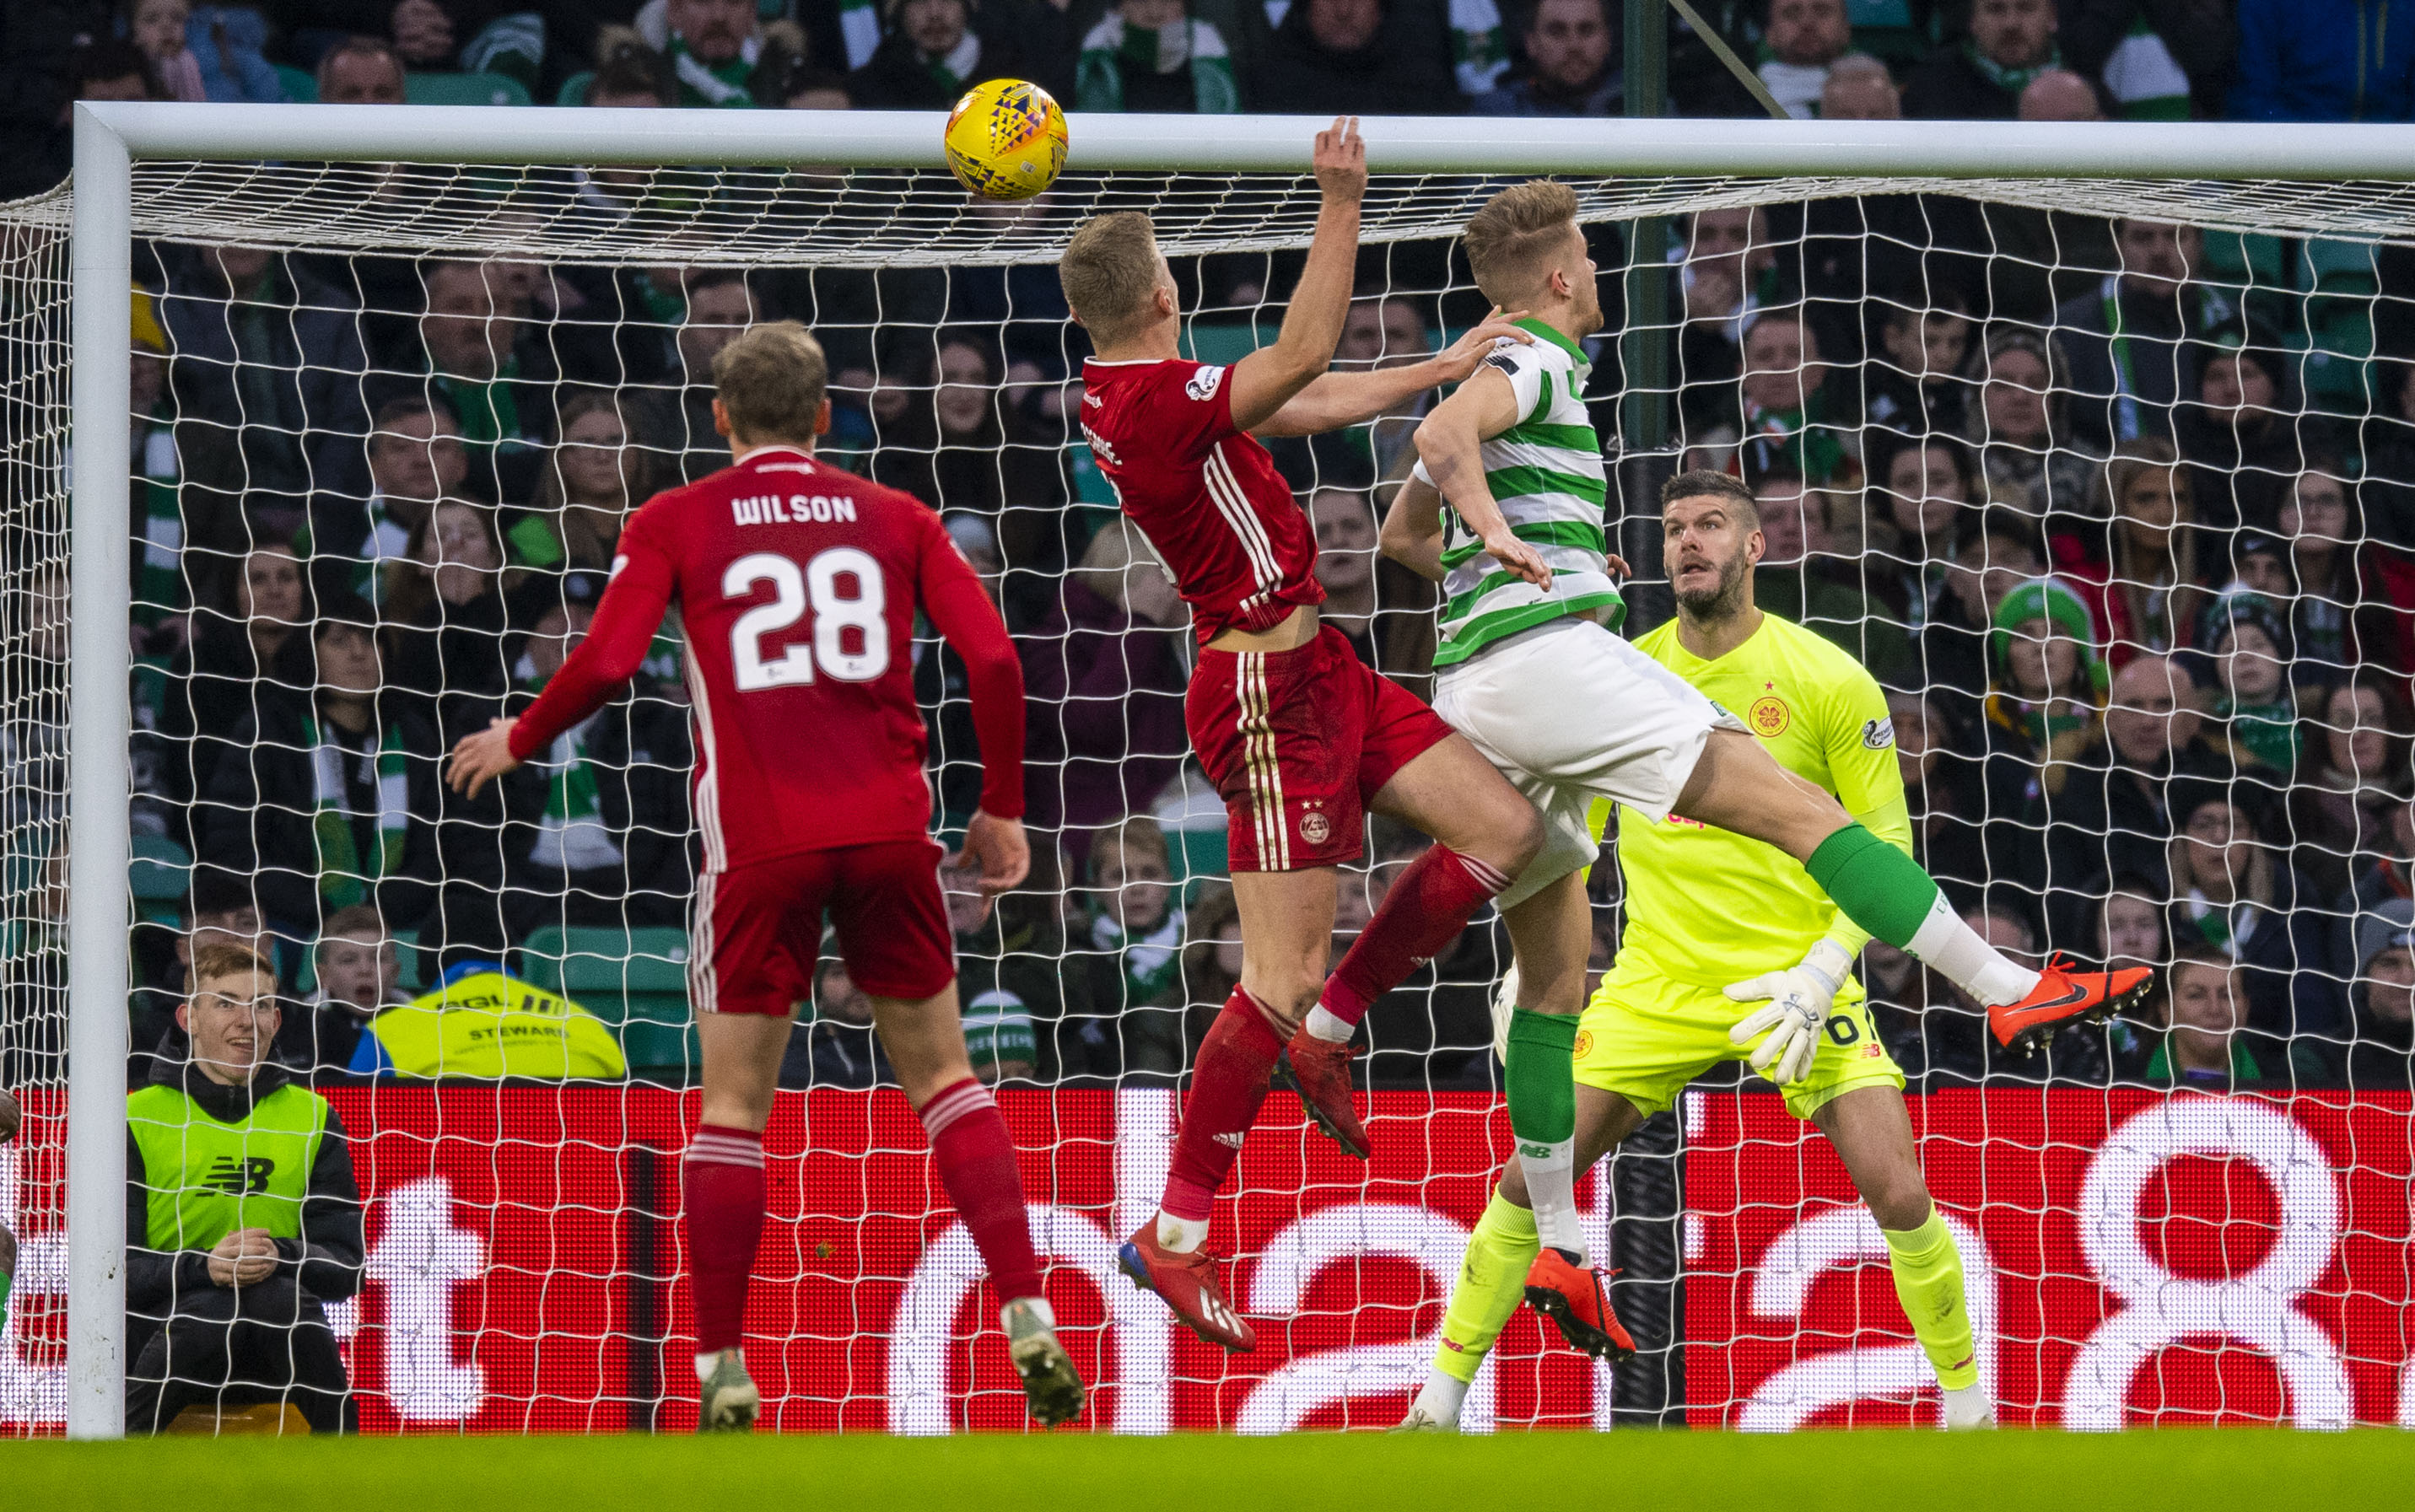 Sam Cosgrove scores the equaliser during a Ladbrokes Premiership match between Celtic and Aberdeen.